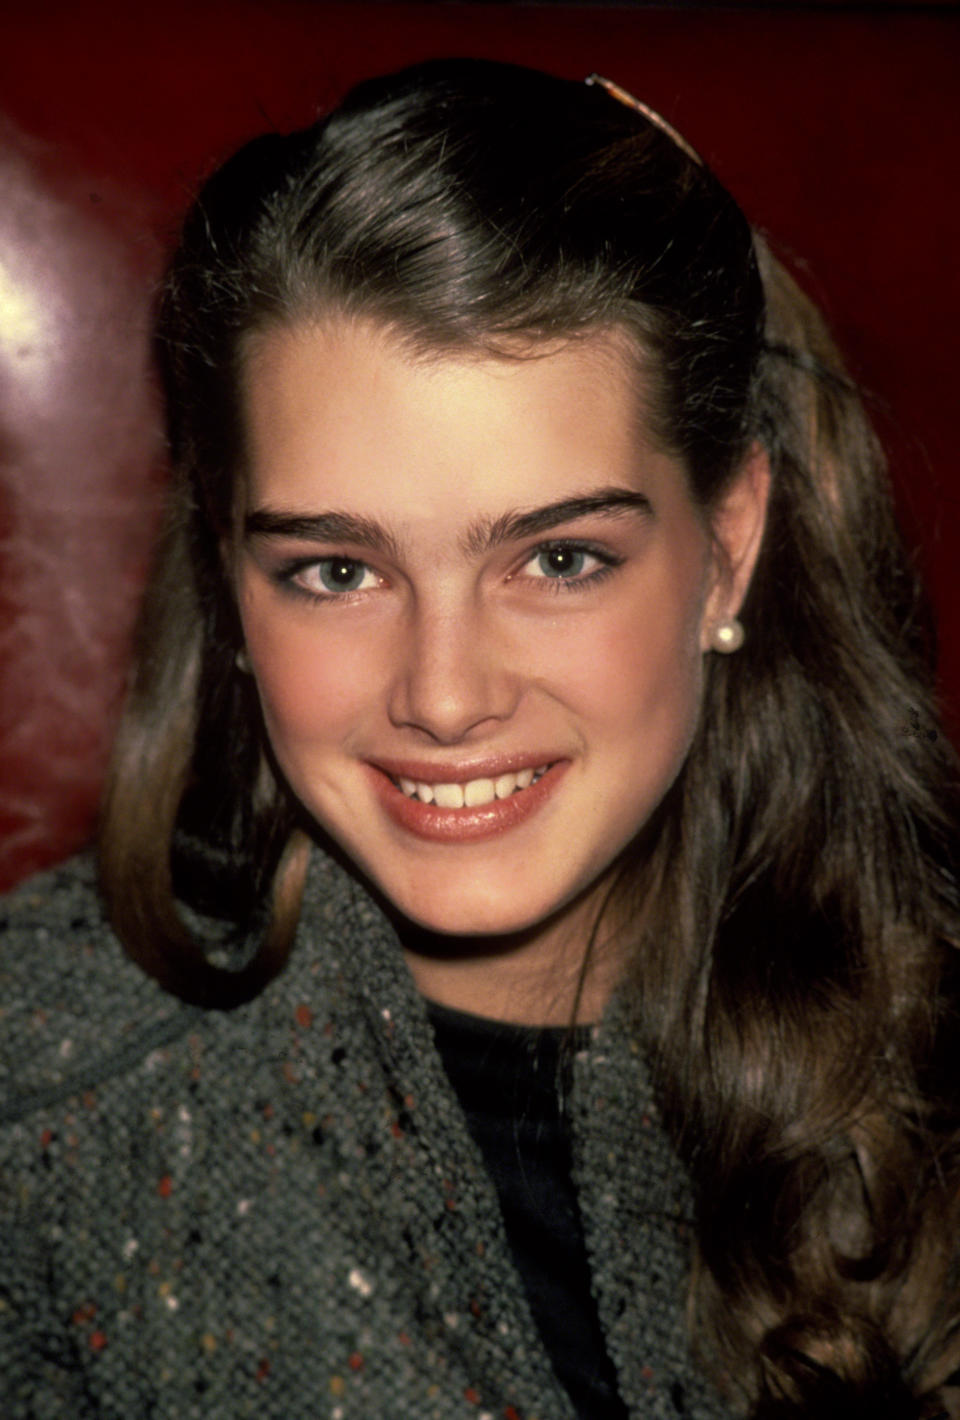 <p> Brooke Shields famously and controversially started working at a very young age. After modeling as a literal baby, she also worked as a child model. Acting followed at a young age too, including 1976's <em>Alice, Sweet Alice</em>, and a long career followed. </p>